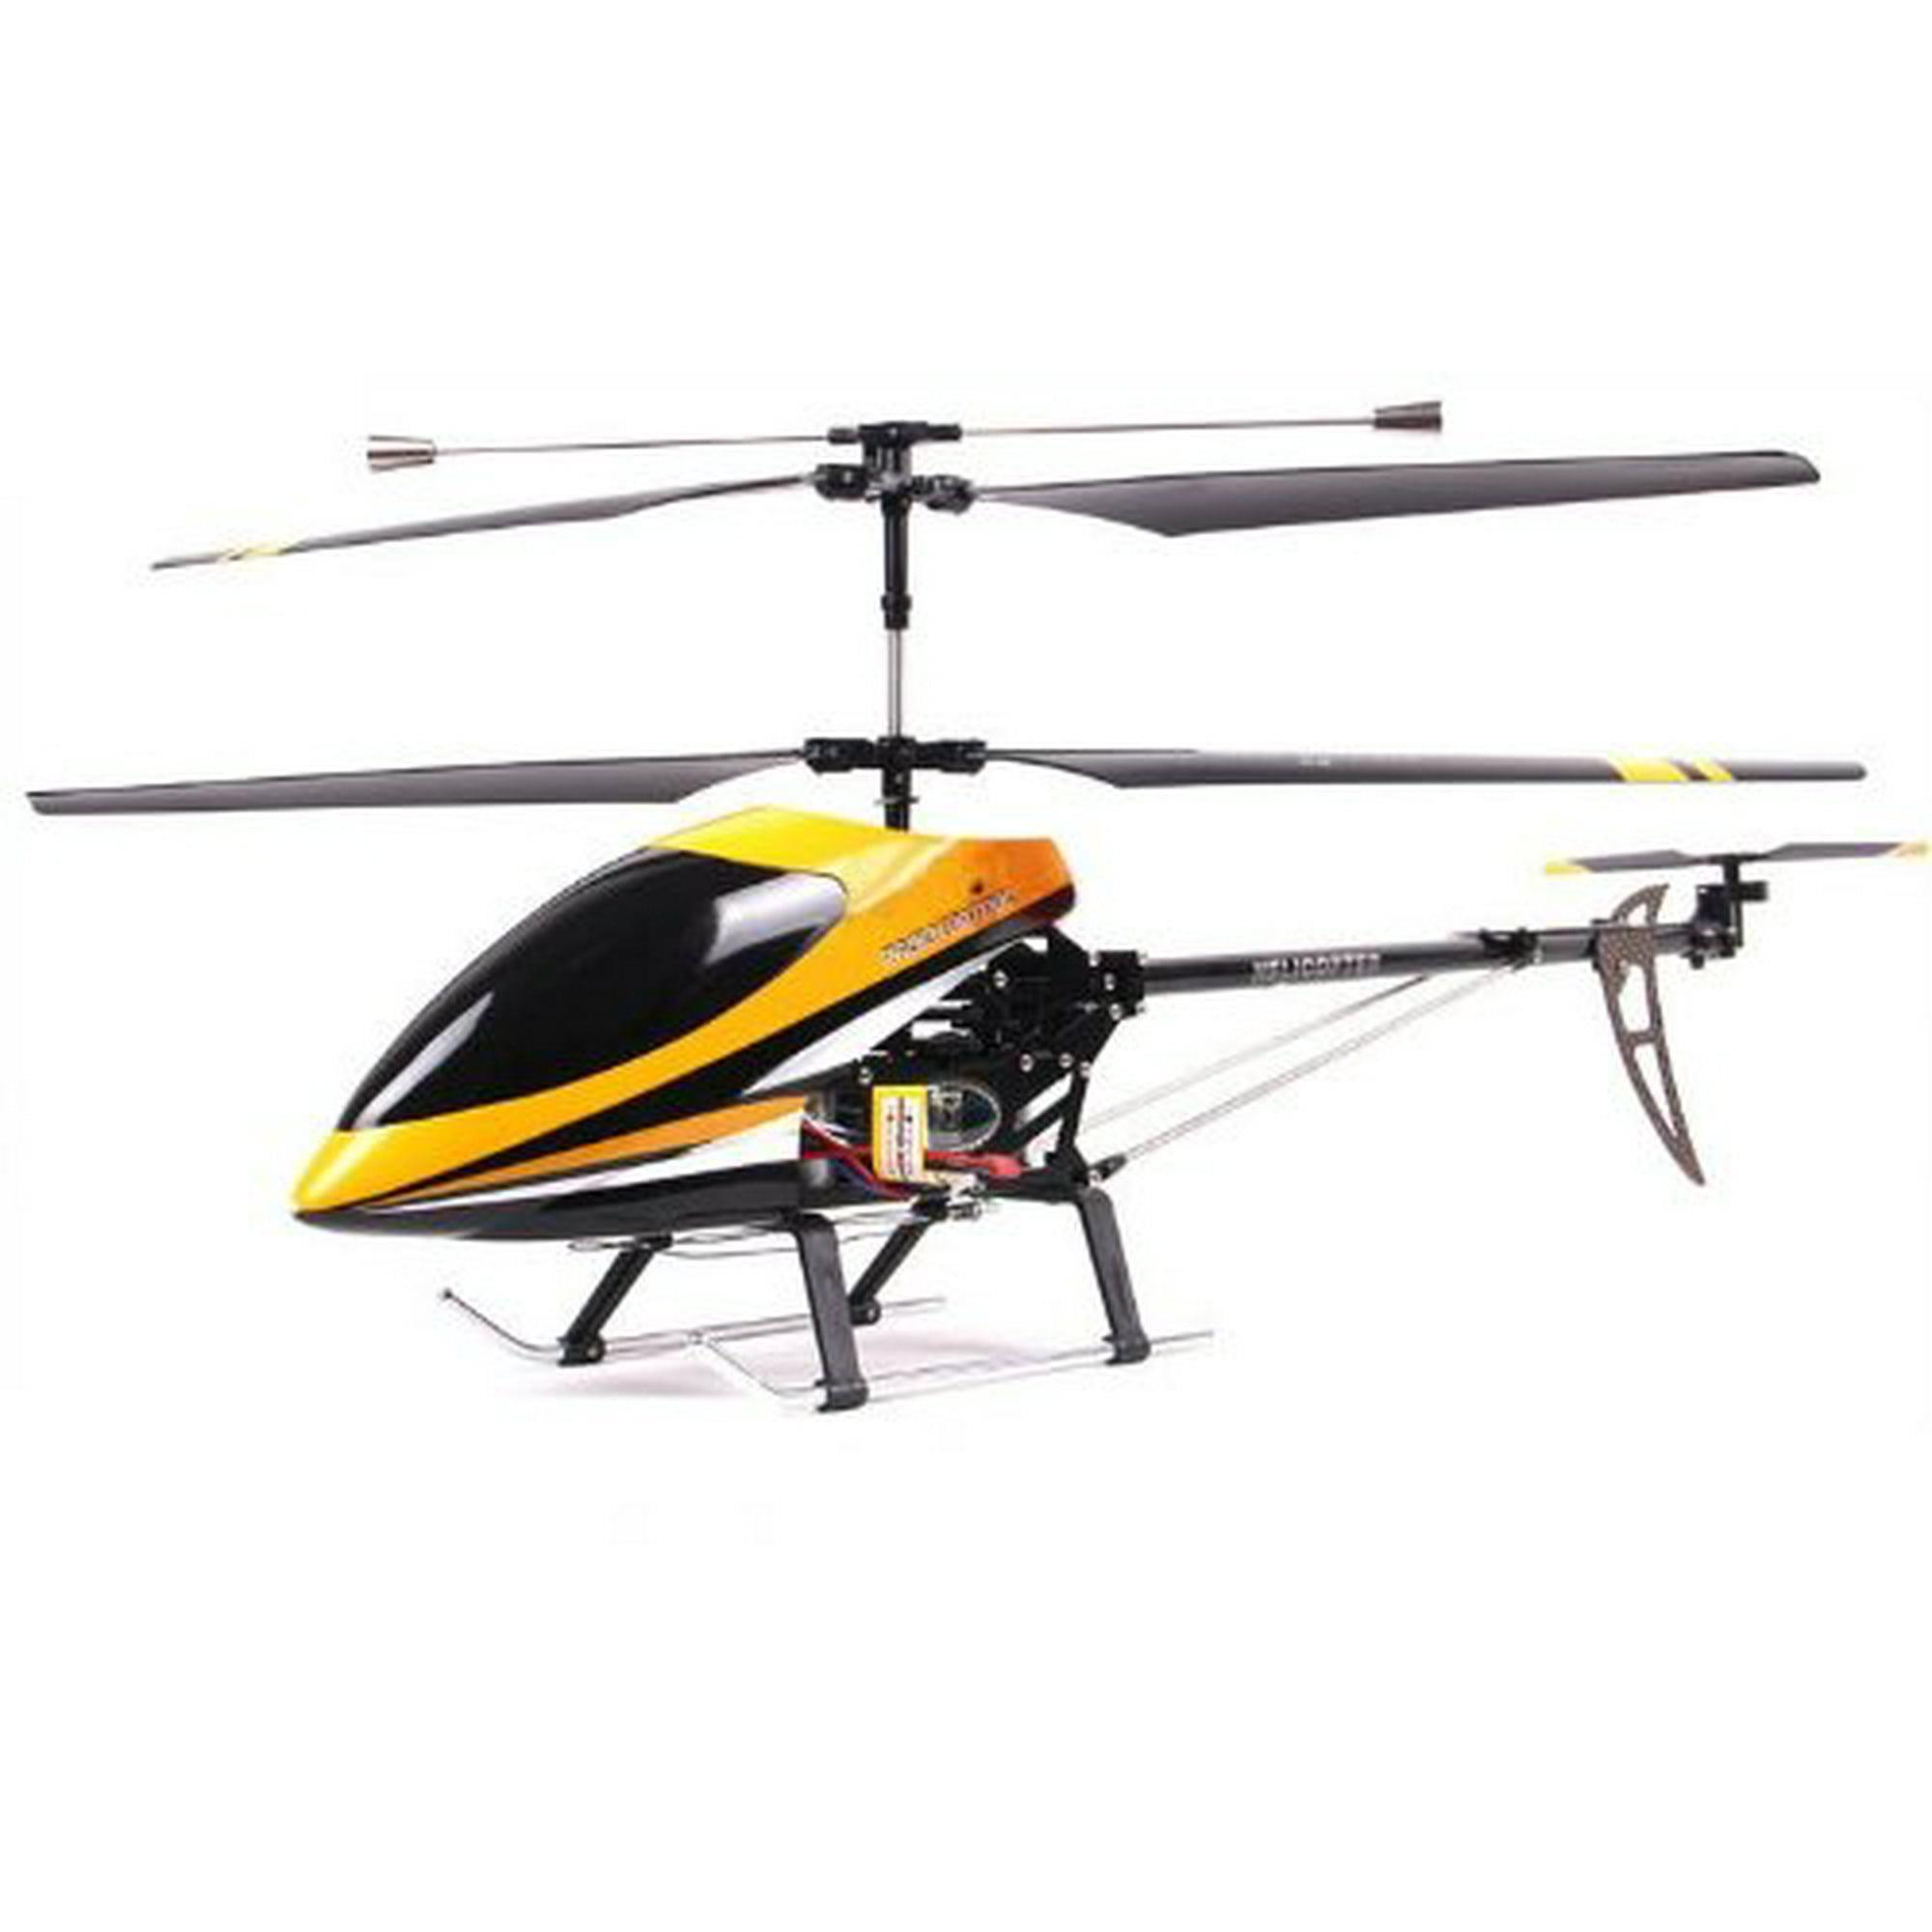 Shuang Ma Double Horse Helicopter: Convenient Online Purchasing for the Shuang Ma Double Horse Helicopter